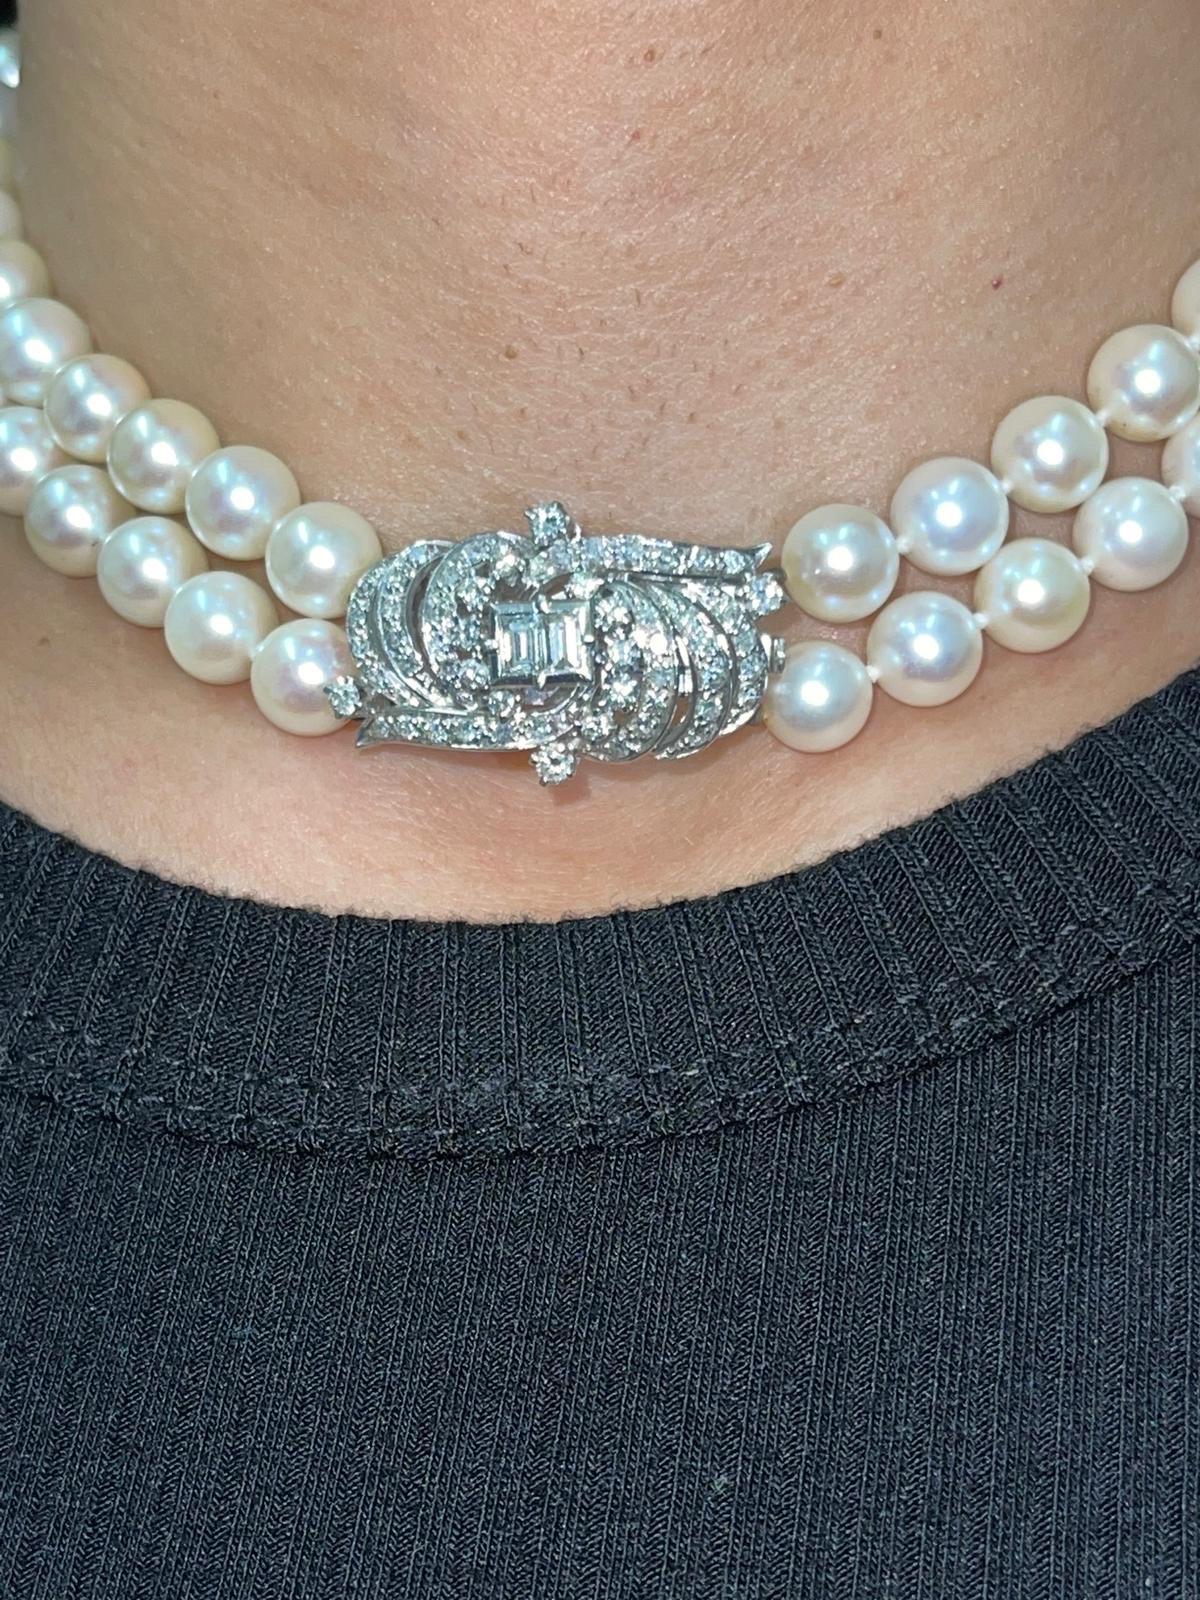 Antique 5.00 Carat Diamonds and Pearls Choker Necklace 18k White Gold For Sale 3